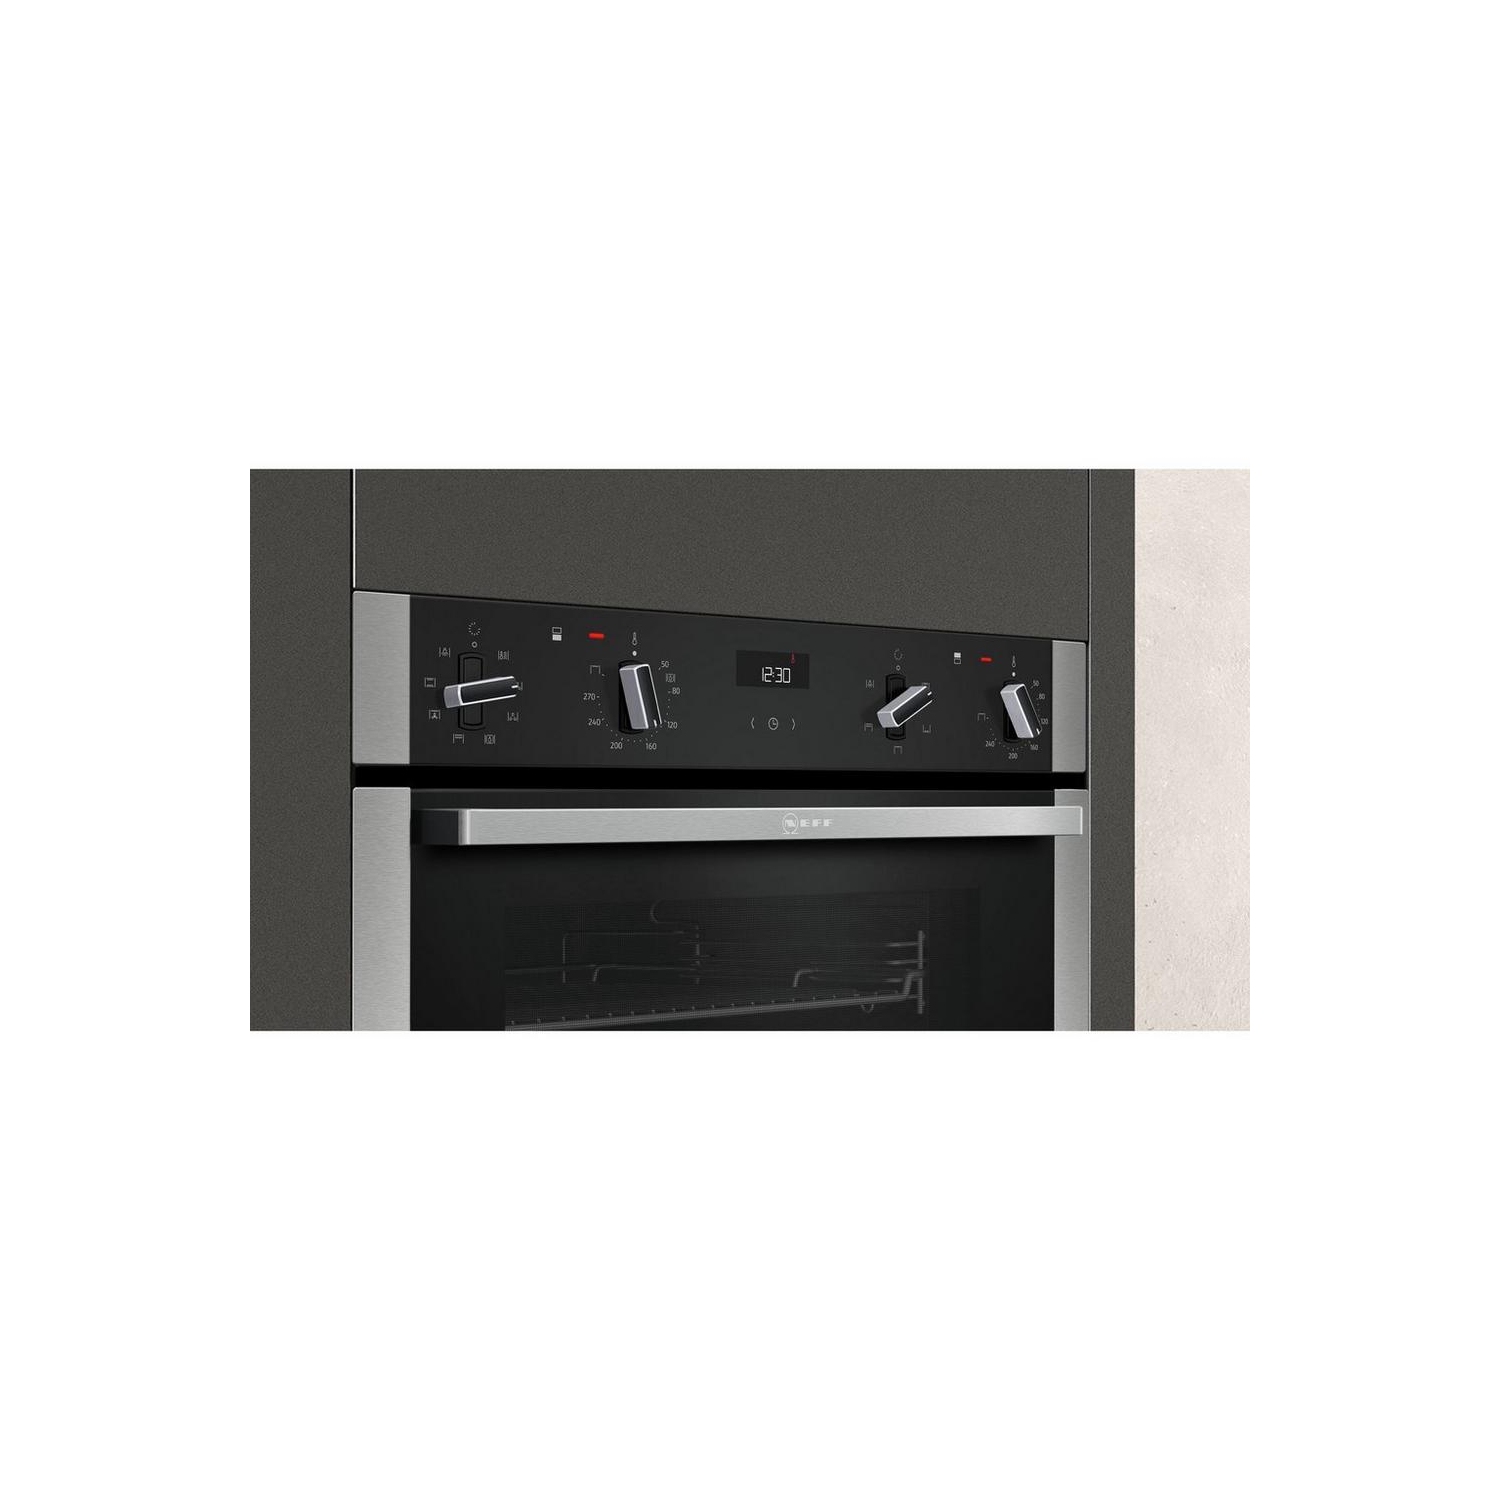 Neff U1ACE2HN0B 59.4cm Built In Electric CircoTherm Double Oven - BLACK/STEEL - 2